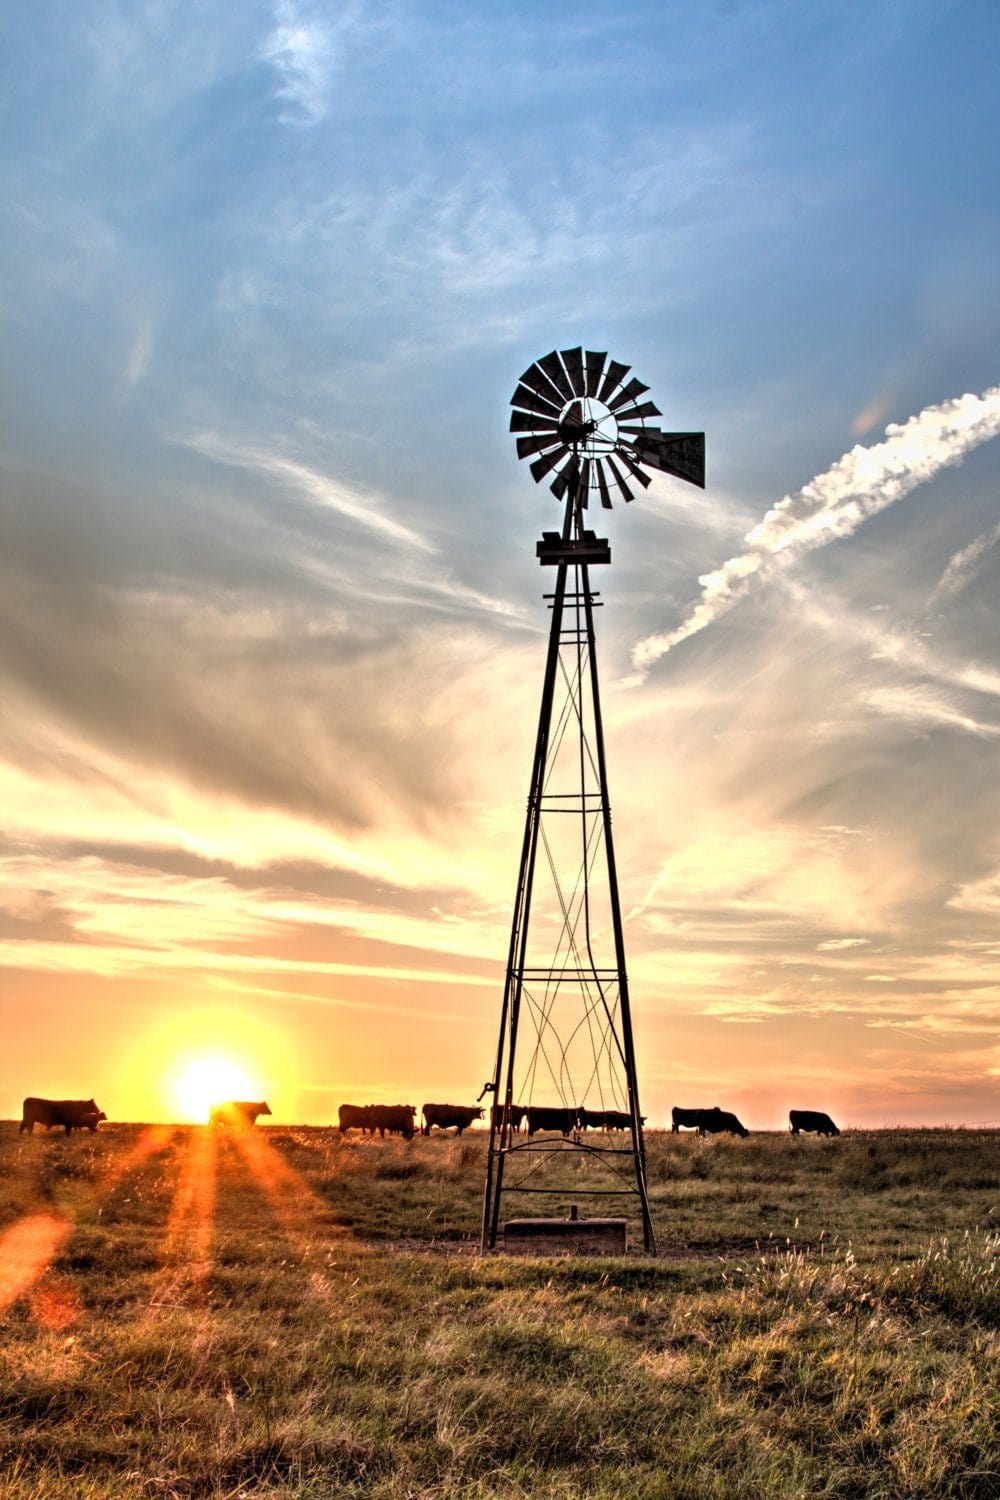 Teri James Photography Wall Art Paper Photo Print / 12 x 18 Inches Rustic Windmill and Black Angus Cattle at Sunset